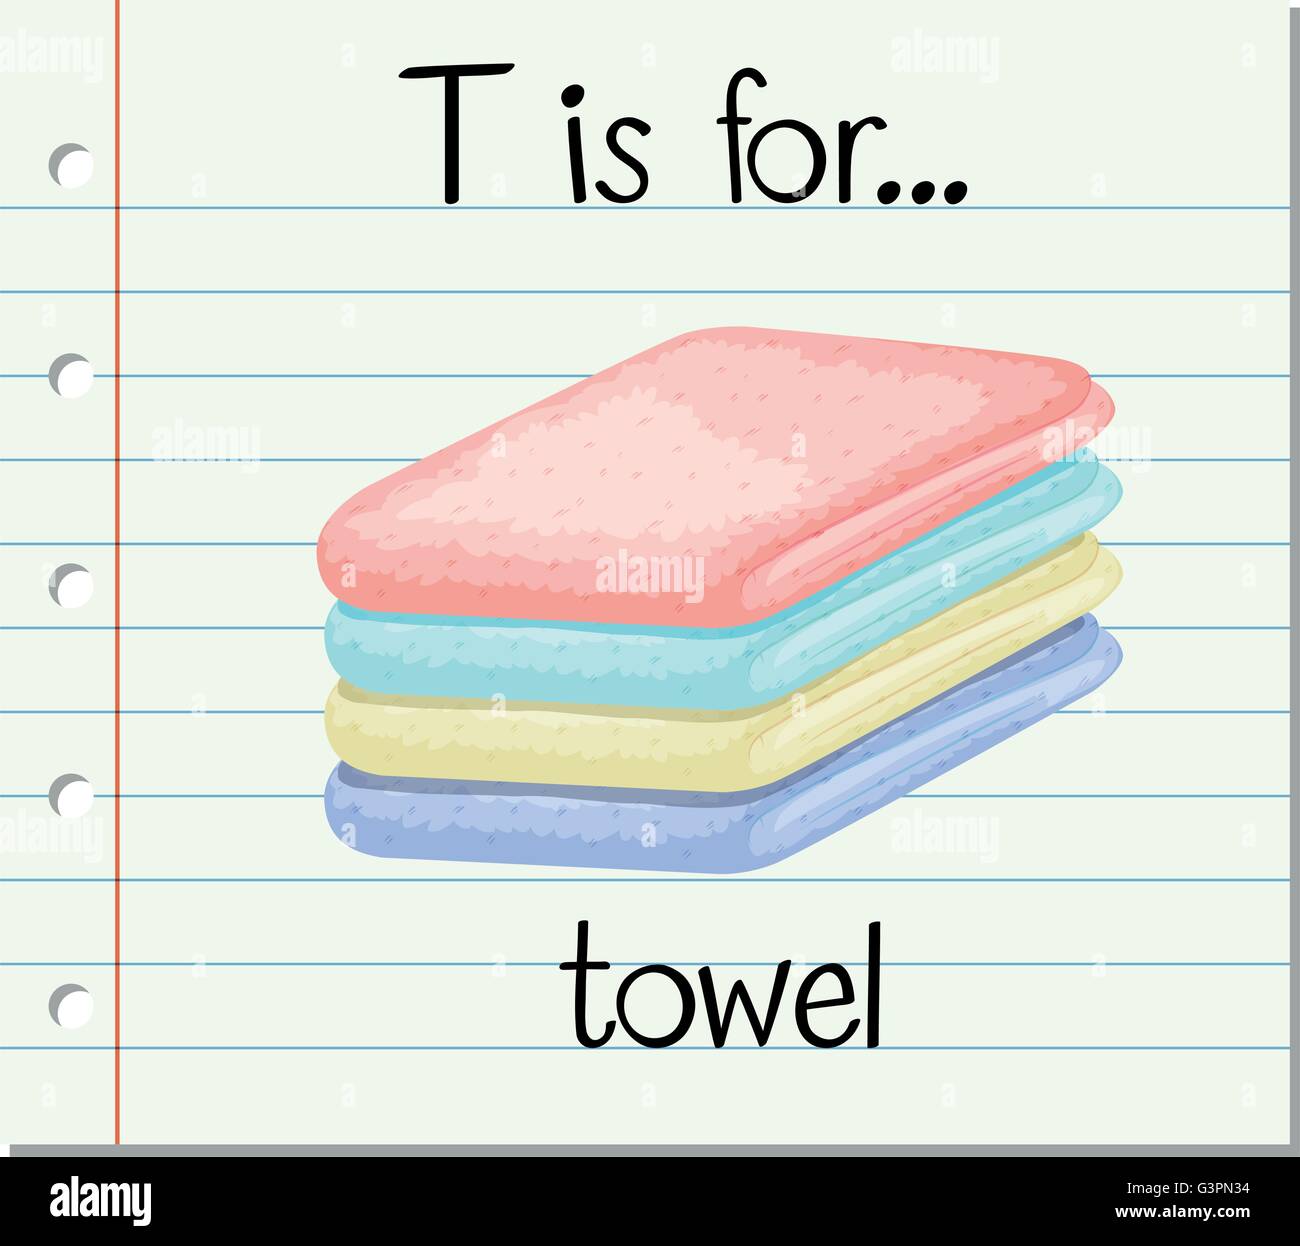 Flashcard letter T is for towel illustration Stock Vector